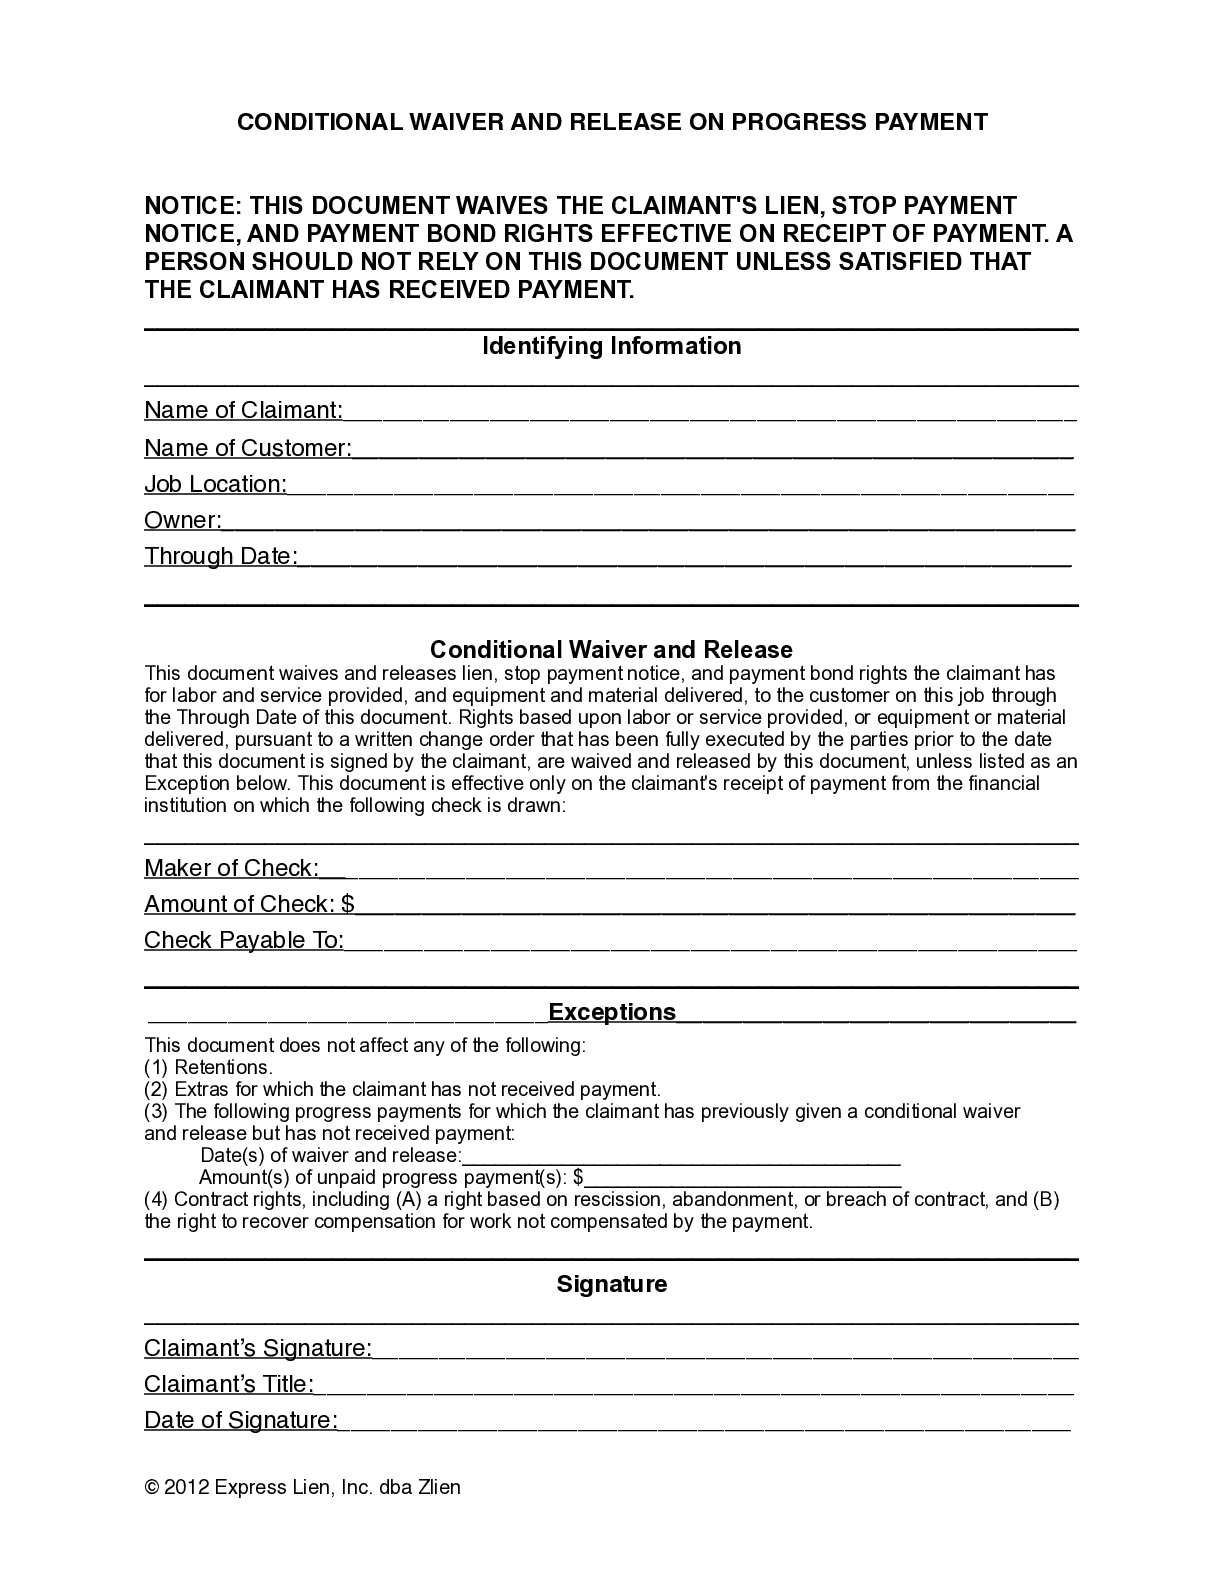 California Conditional Waiver and Release on Progress Payment form - free from